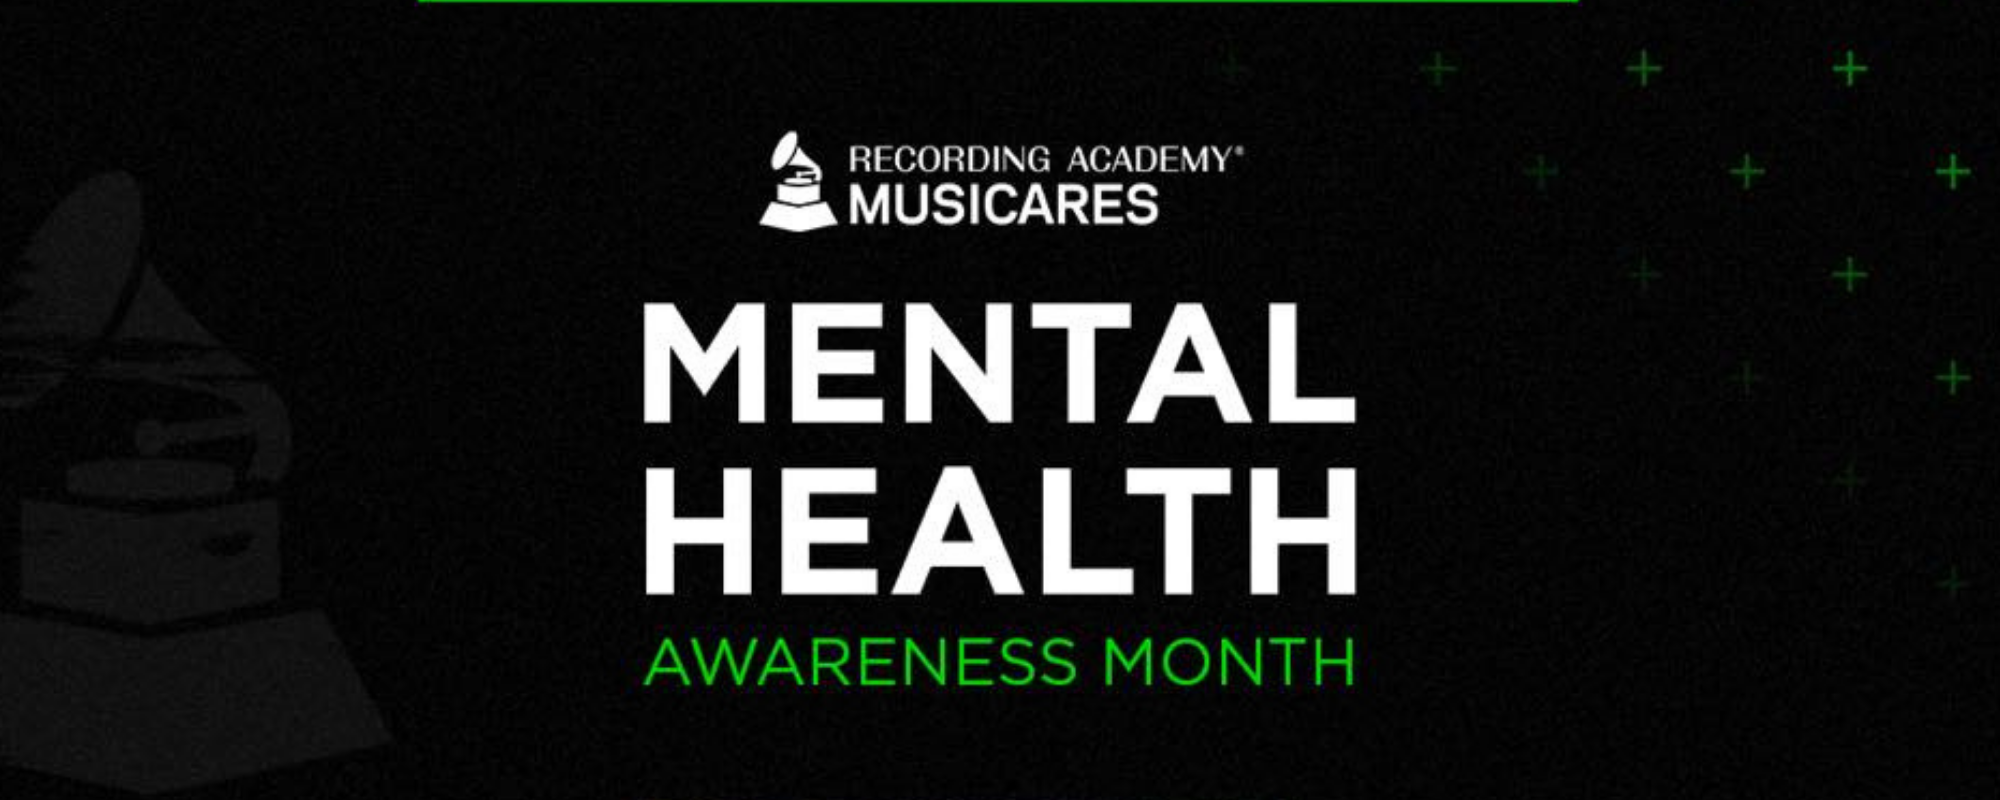 MusiCares Commits to Mental Health Support for Music Professionals with New Initiatives